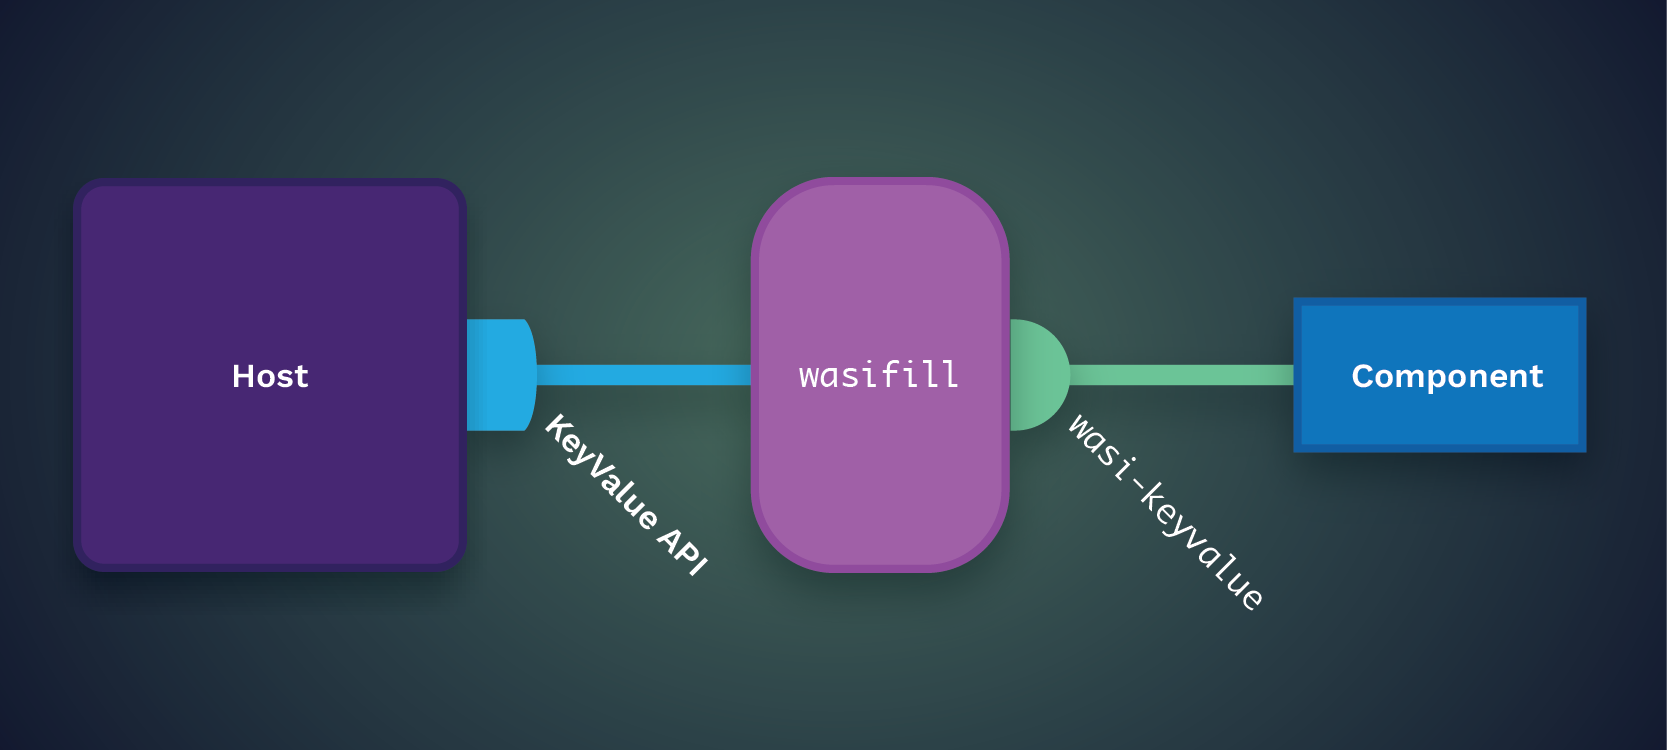 Diagram of a component connecting to a Host through a wasifill using the WASI keyvalue contract